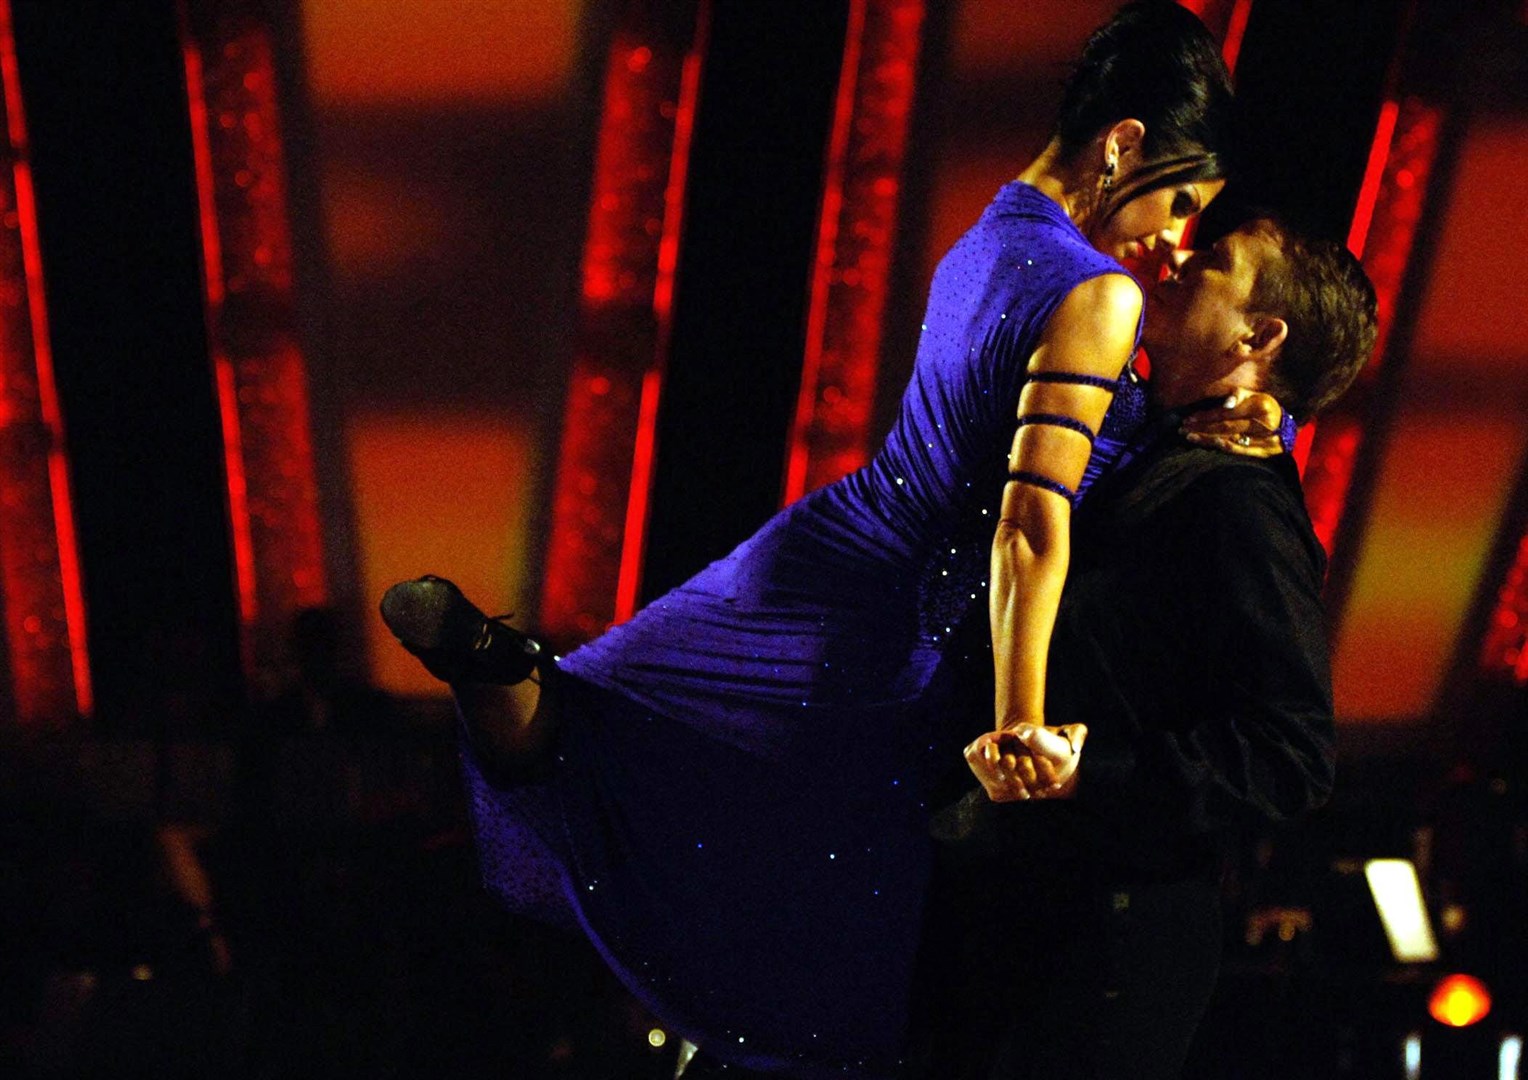 BBC Breakfast presenter Bill Turnbull and his dance partner Karen Hardy performing during Strictly Come Dancing in 2005 (BBC/PA)